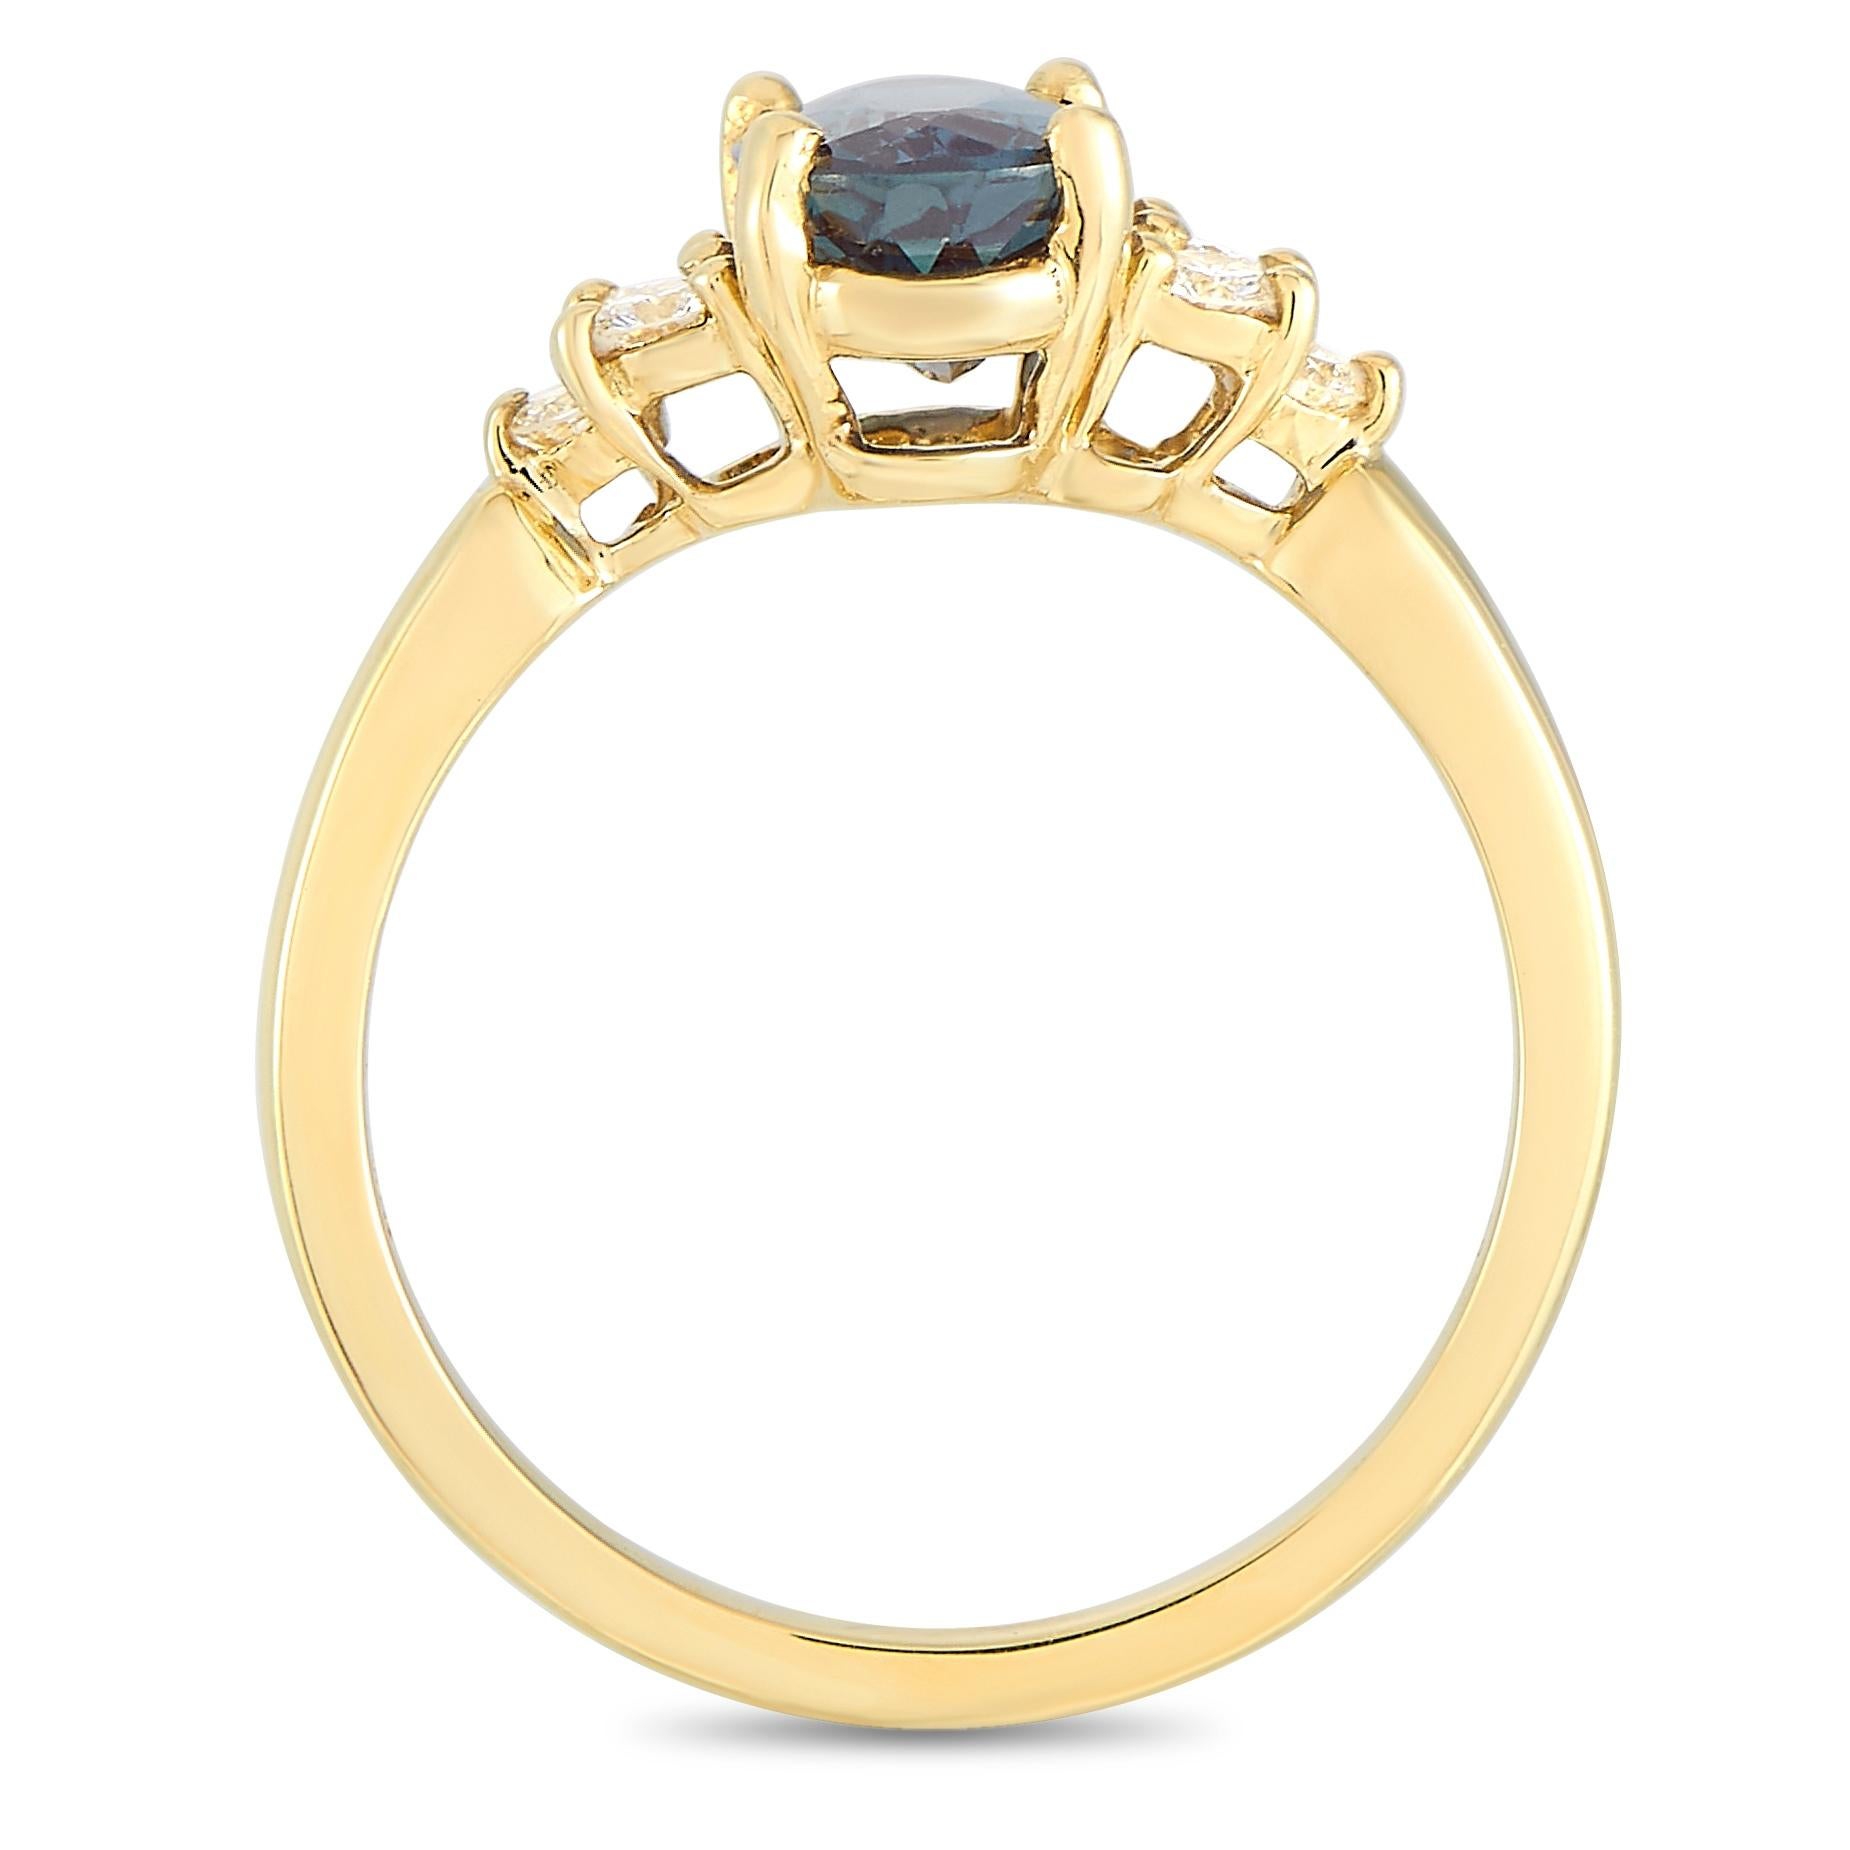 This Tiffany & Co. ring is made of 18K yellow gold and embellished with a 1.59 ct alexandrite and a total of 0.21 carats of diamonds. The ring weighs 3.2 grams. It boasts band thickness of 2 mm and top height of 5 mm, while top dimensions measure 9